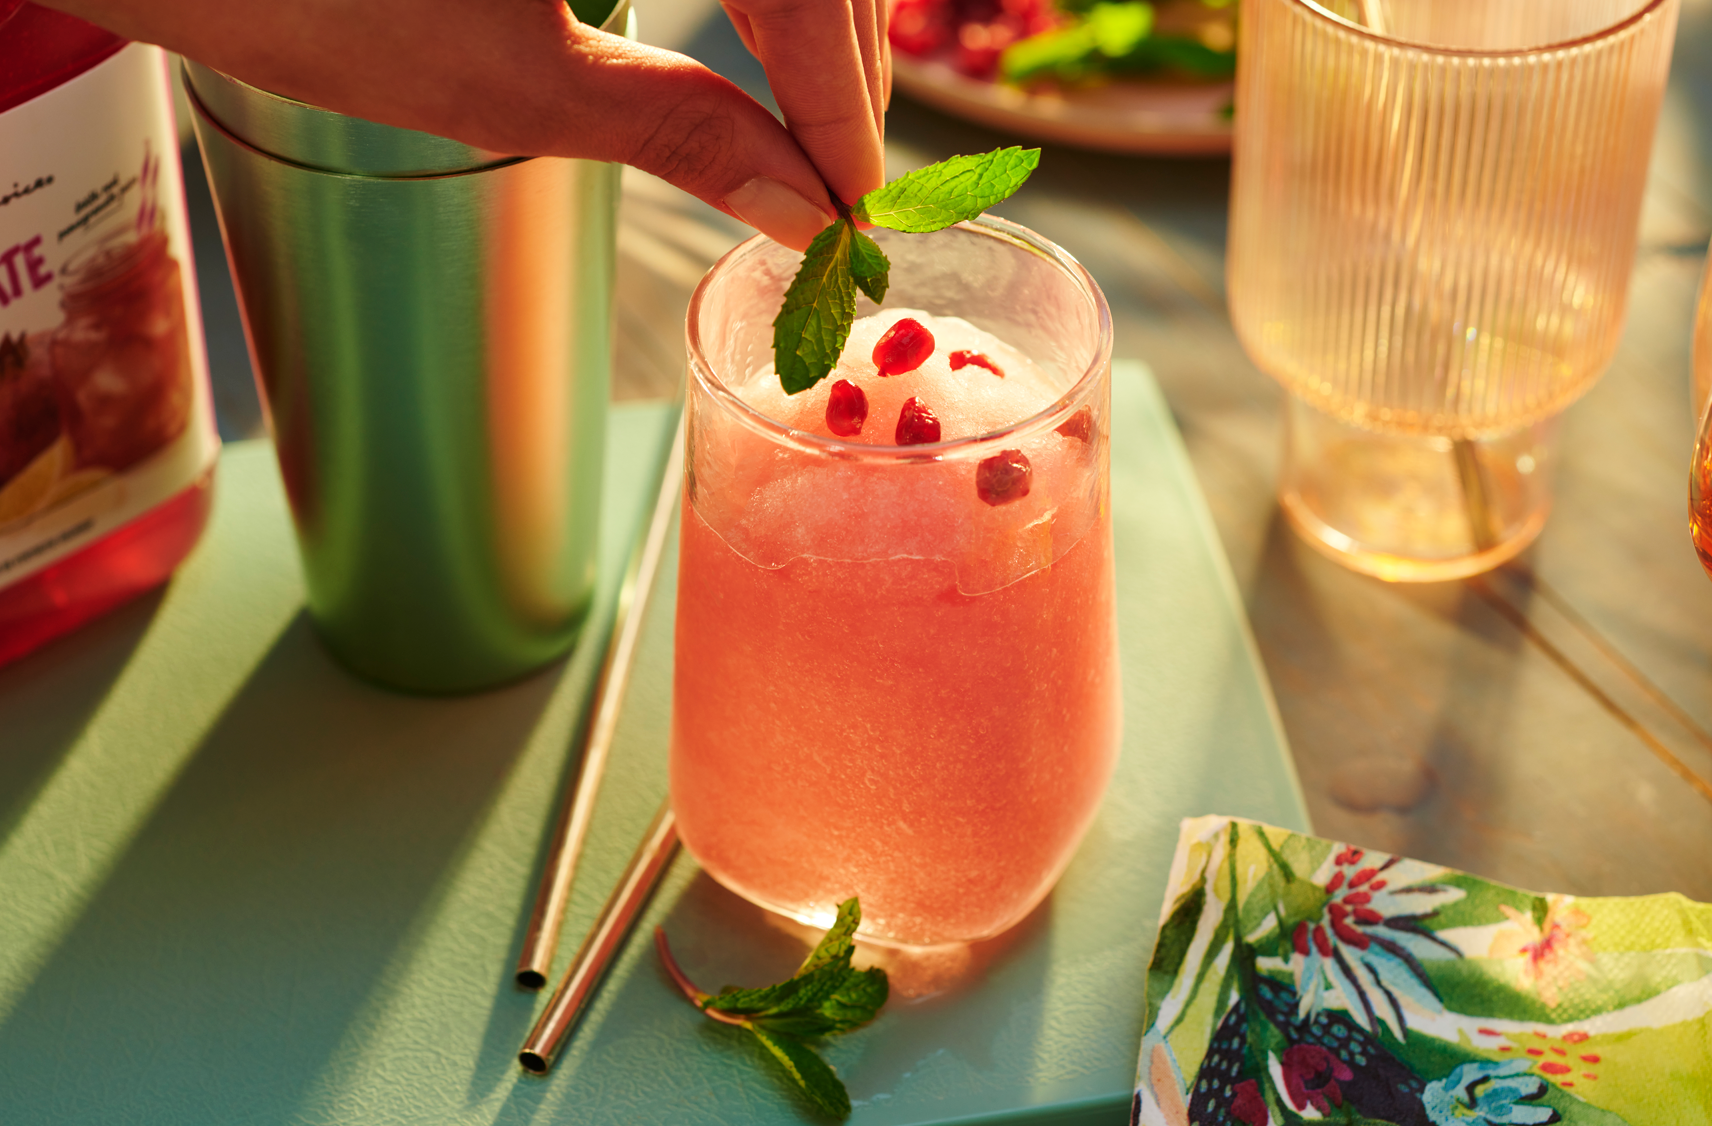 A hand putting mint leaves into a glass of pomegranate frose with arils on top.